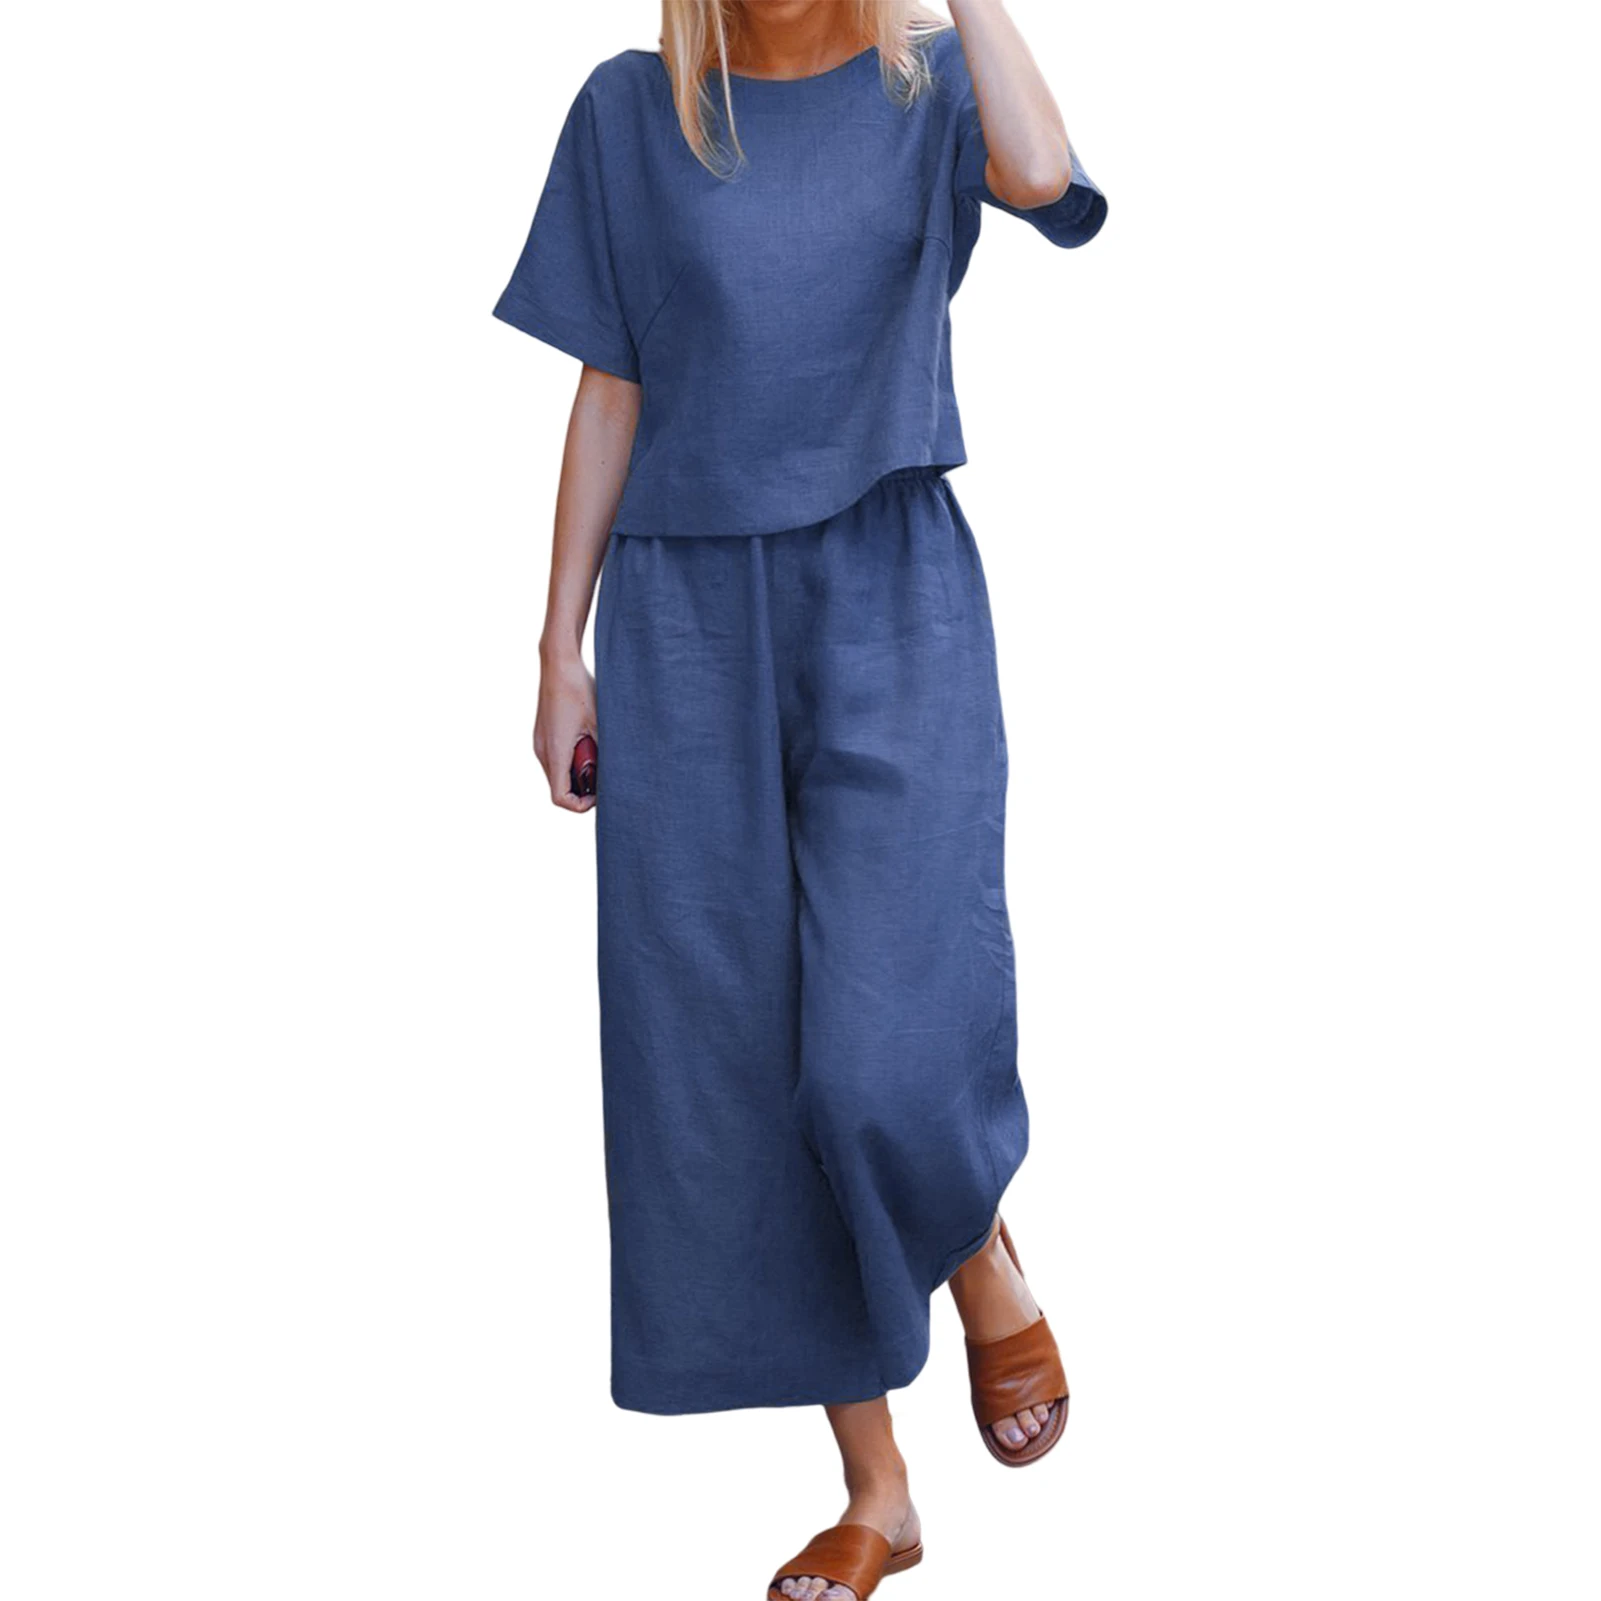 

Solid Color Casual 2 Piece Outfits Wide Leg Women Cami Top Long Pants Crew Neck Elastic Waist Short Sleeve Vacation Outfit